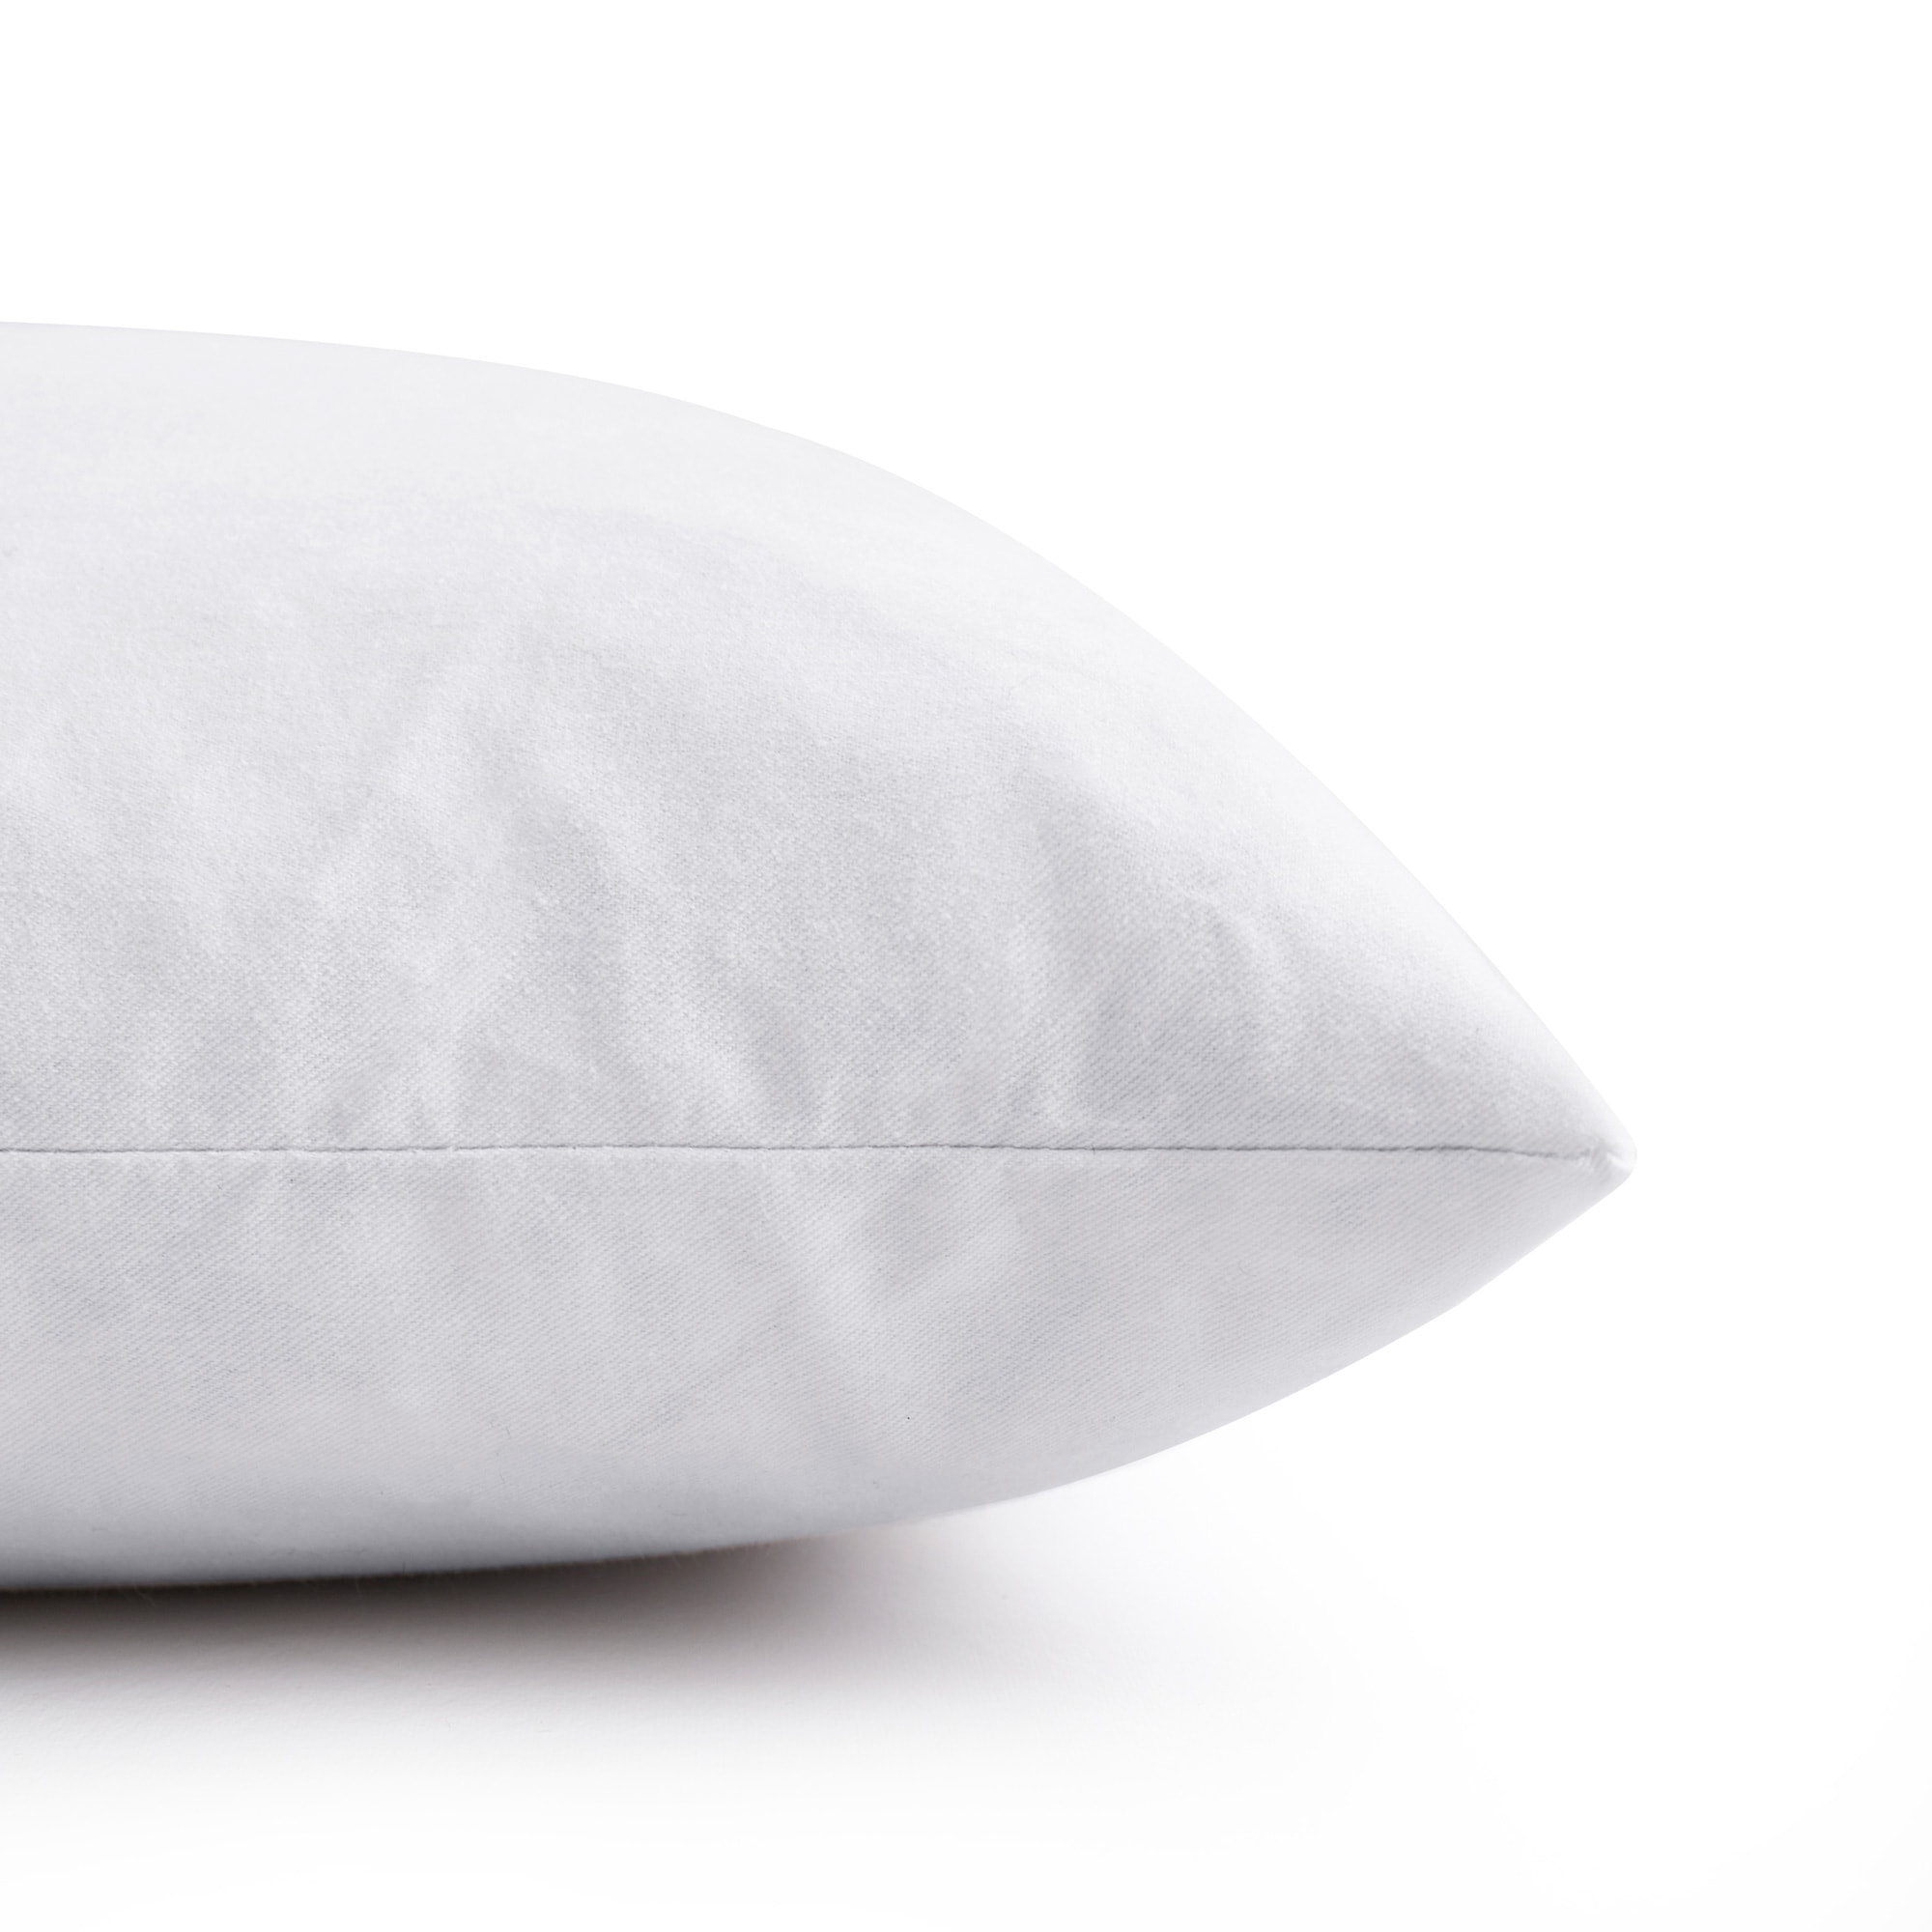 https://ak1.ostkcdn.com/images/products/is/images/direct/51bb8bdf8ae9a228c3038ae8063e1561c03eeca5/Feather-Down-Pillow-Inserts-Decorative-Throw-Pillows.jpg